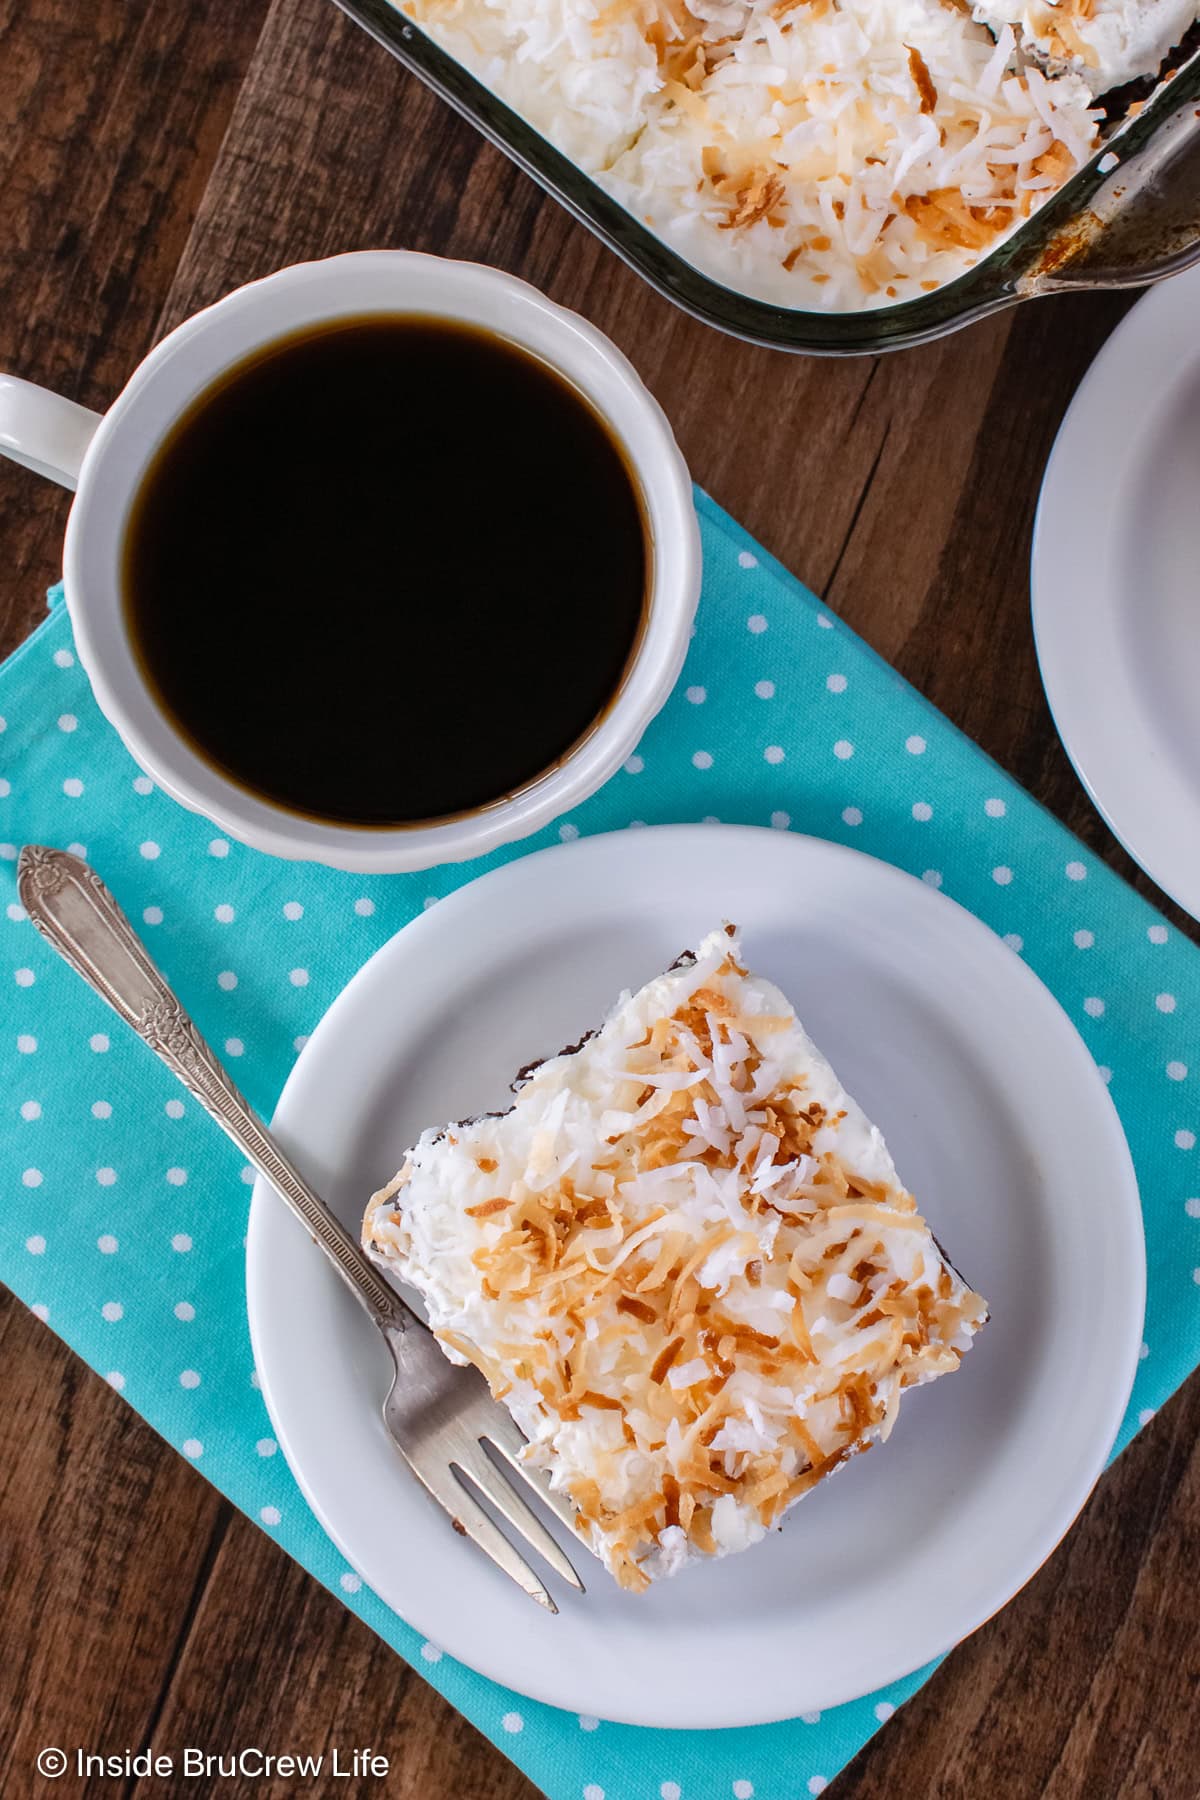 A slice of cake on a plate topped with Cool Whip and toasted coconut.